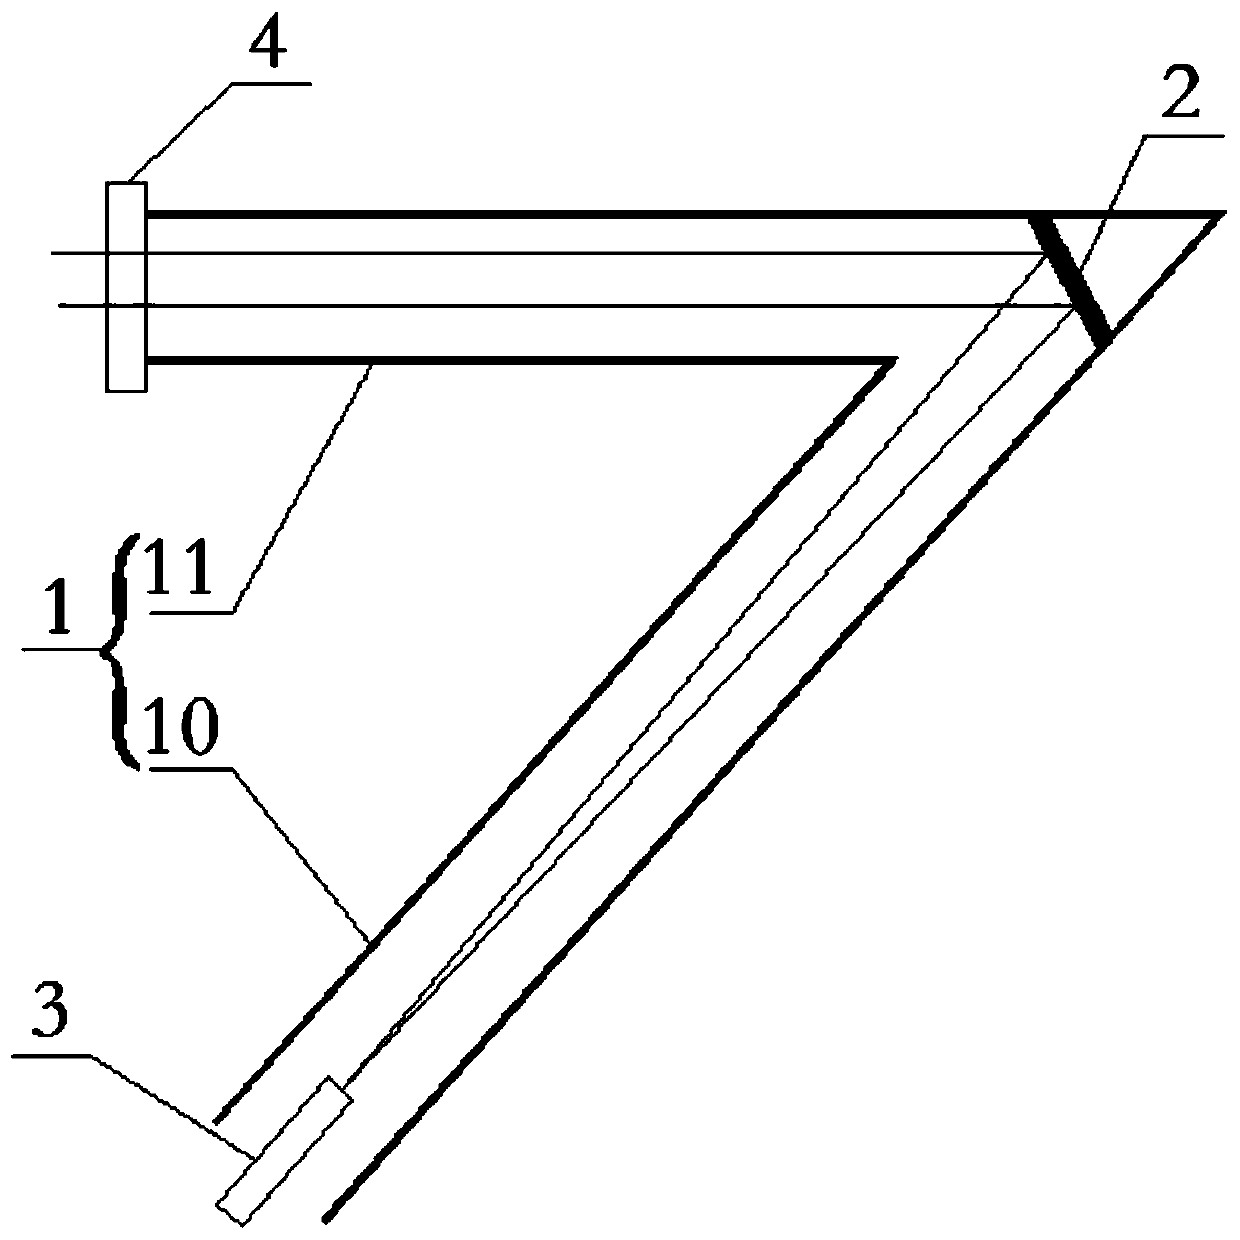 An off-axis reflective optical antenna and system